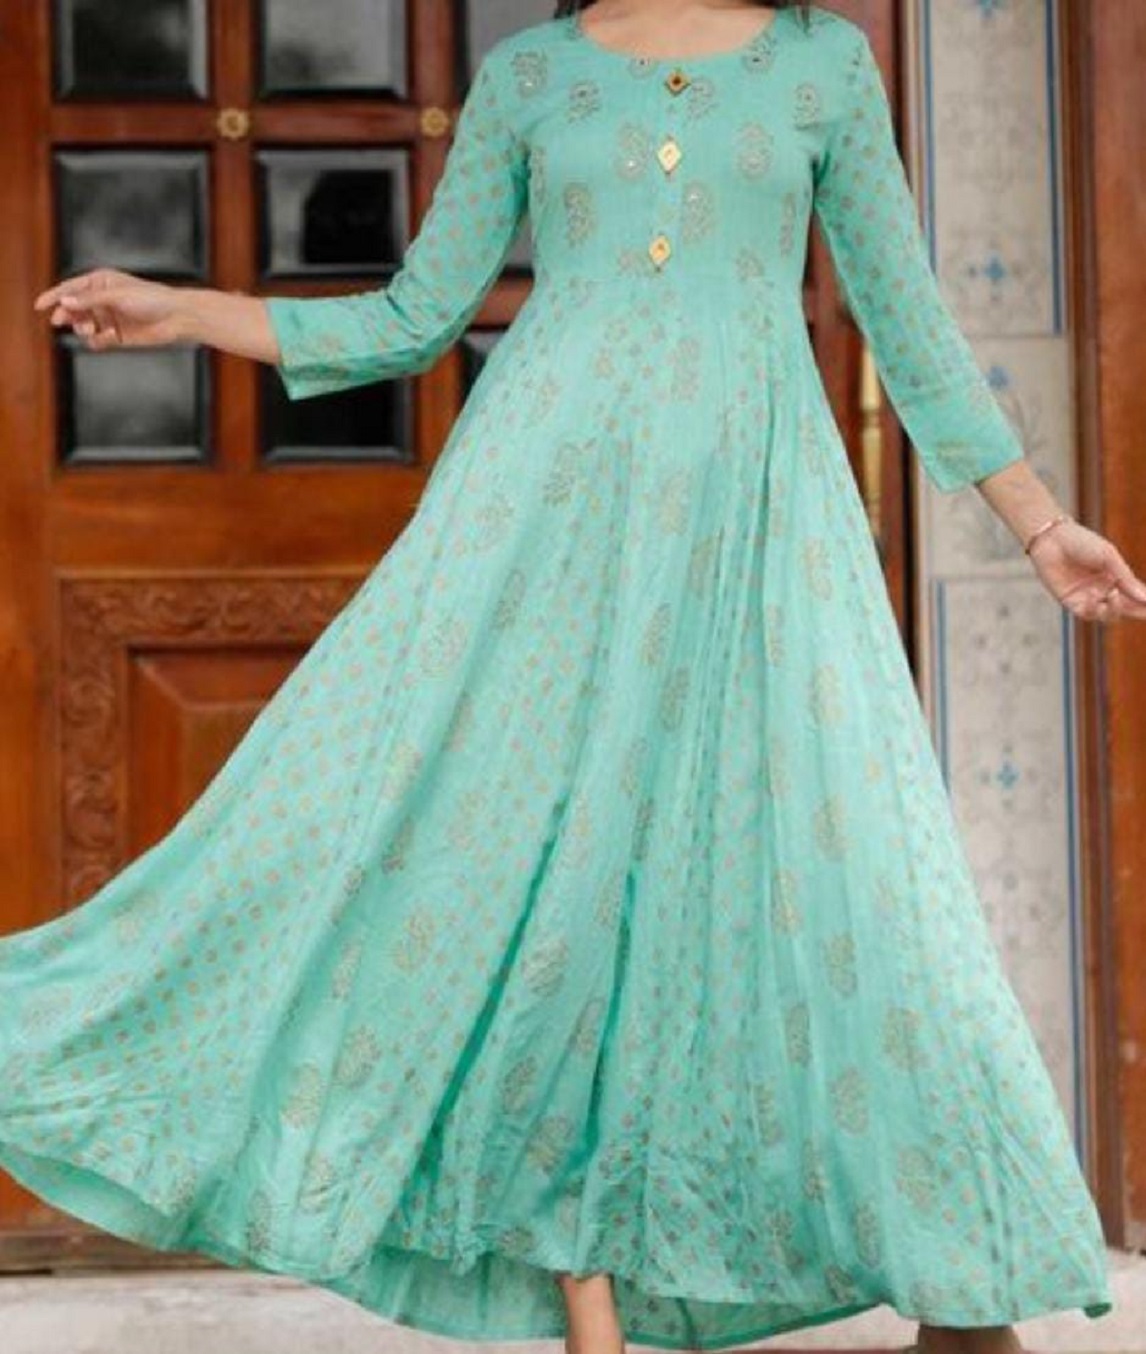 Anarkali flaired long gown